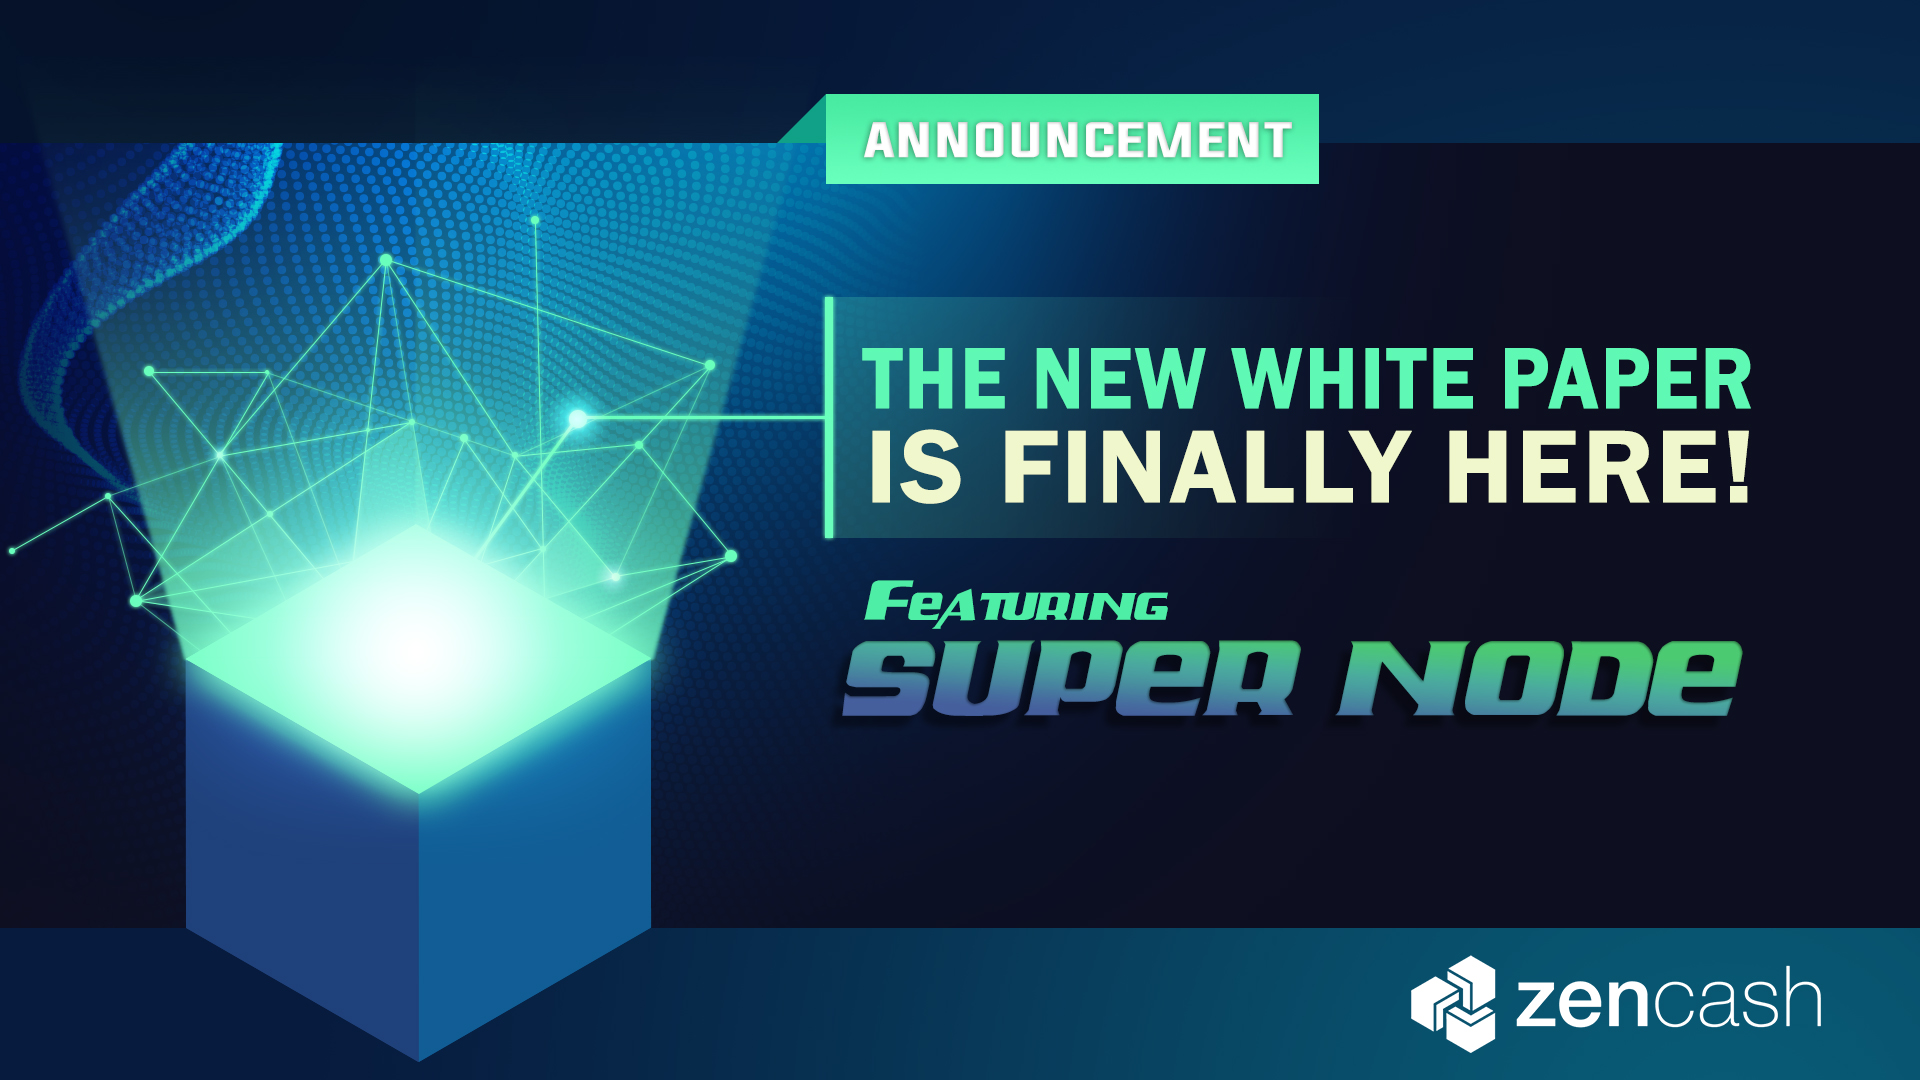 super node white paper is here